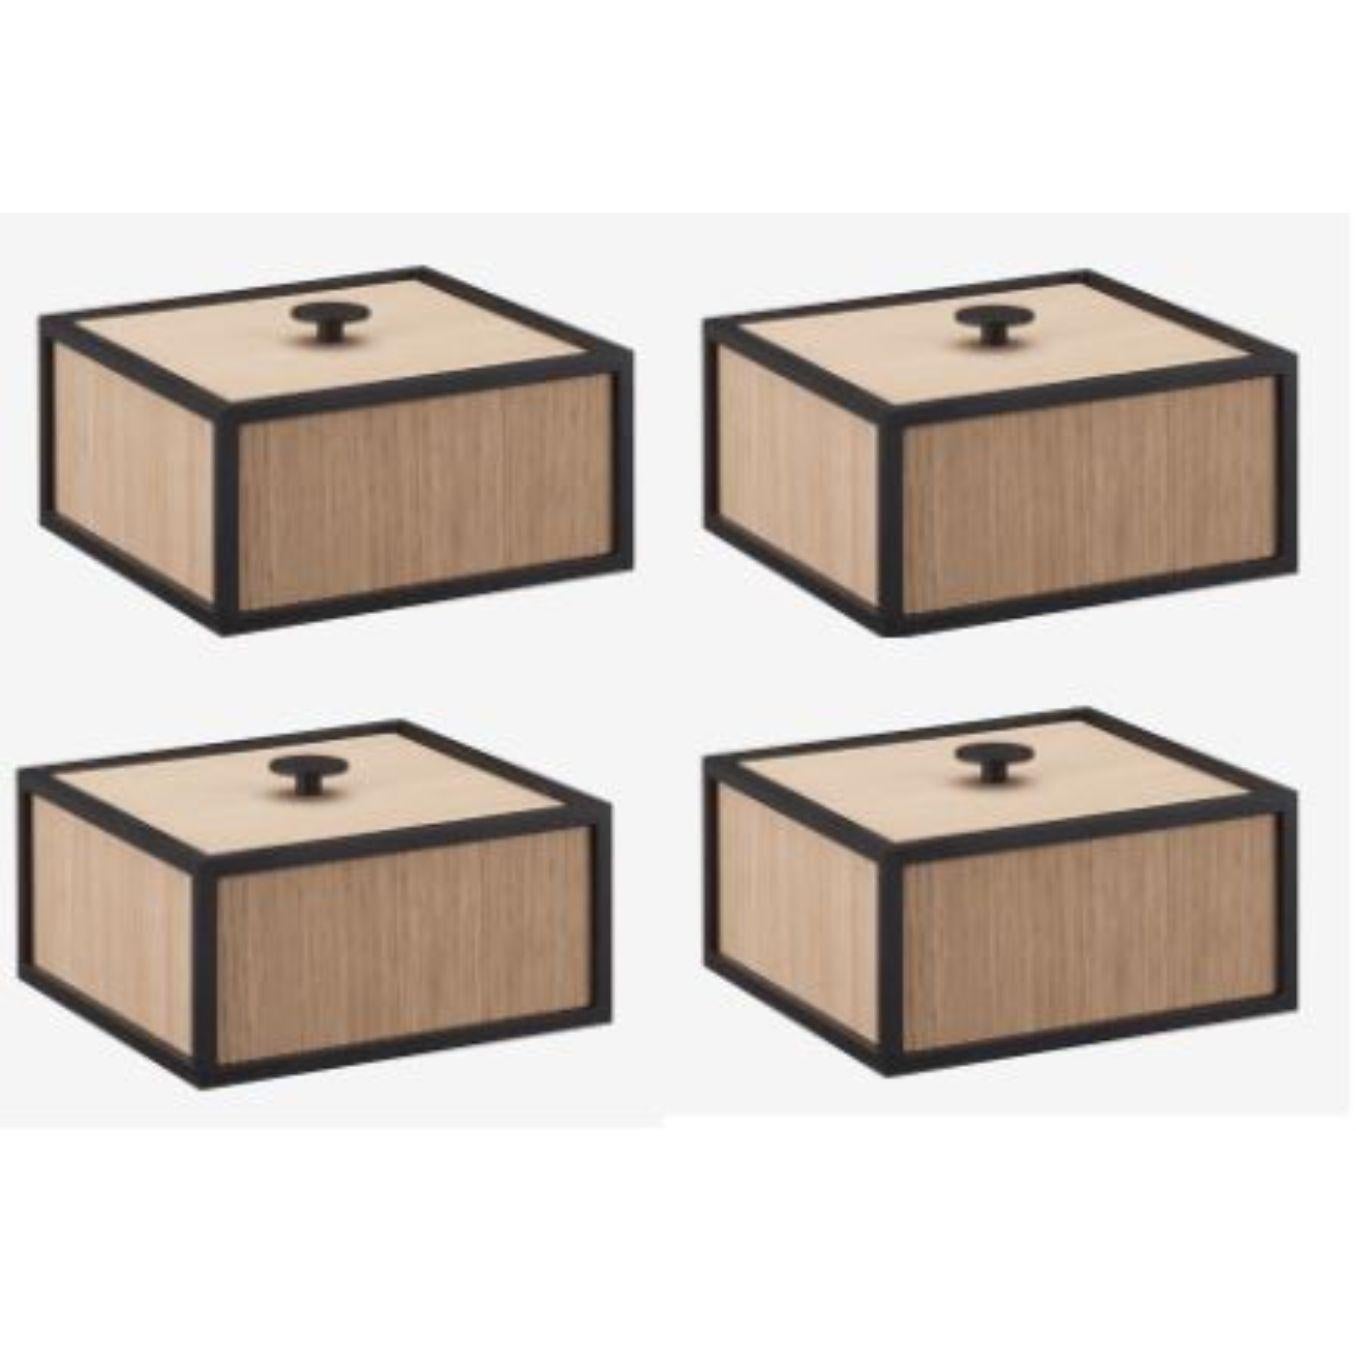 Set of 4 oak frame 14 box by Lassen
Dimensions: d 10 x w 10 x h 7 cm 
Materials: Finér, Melamin, Melamine, Metal, Veneer
Weight: 1.10 Kg

Frame Box is a square box in a cubistic shape. The simple boxes are inspired by the Kubus candleholder by